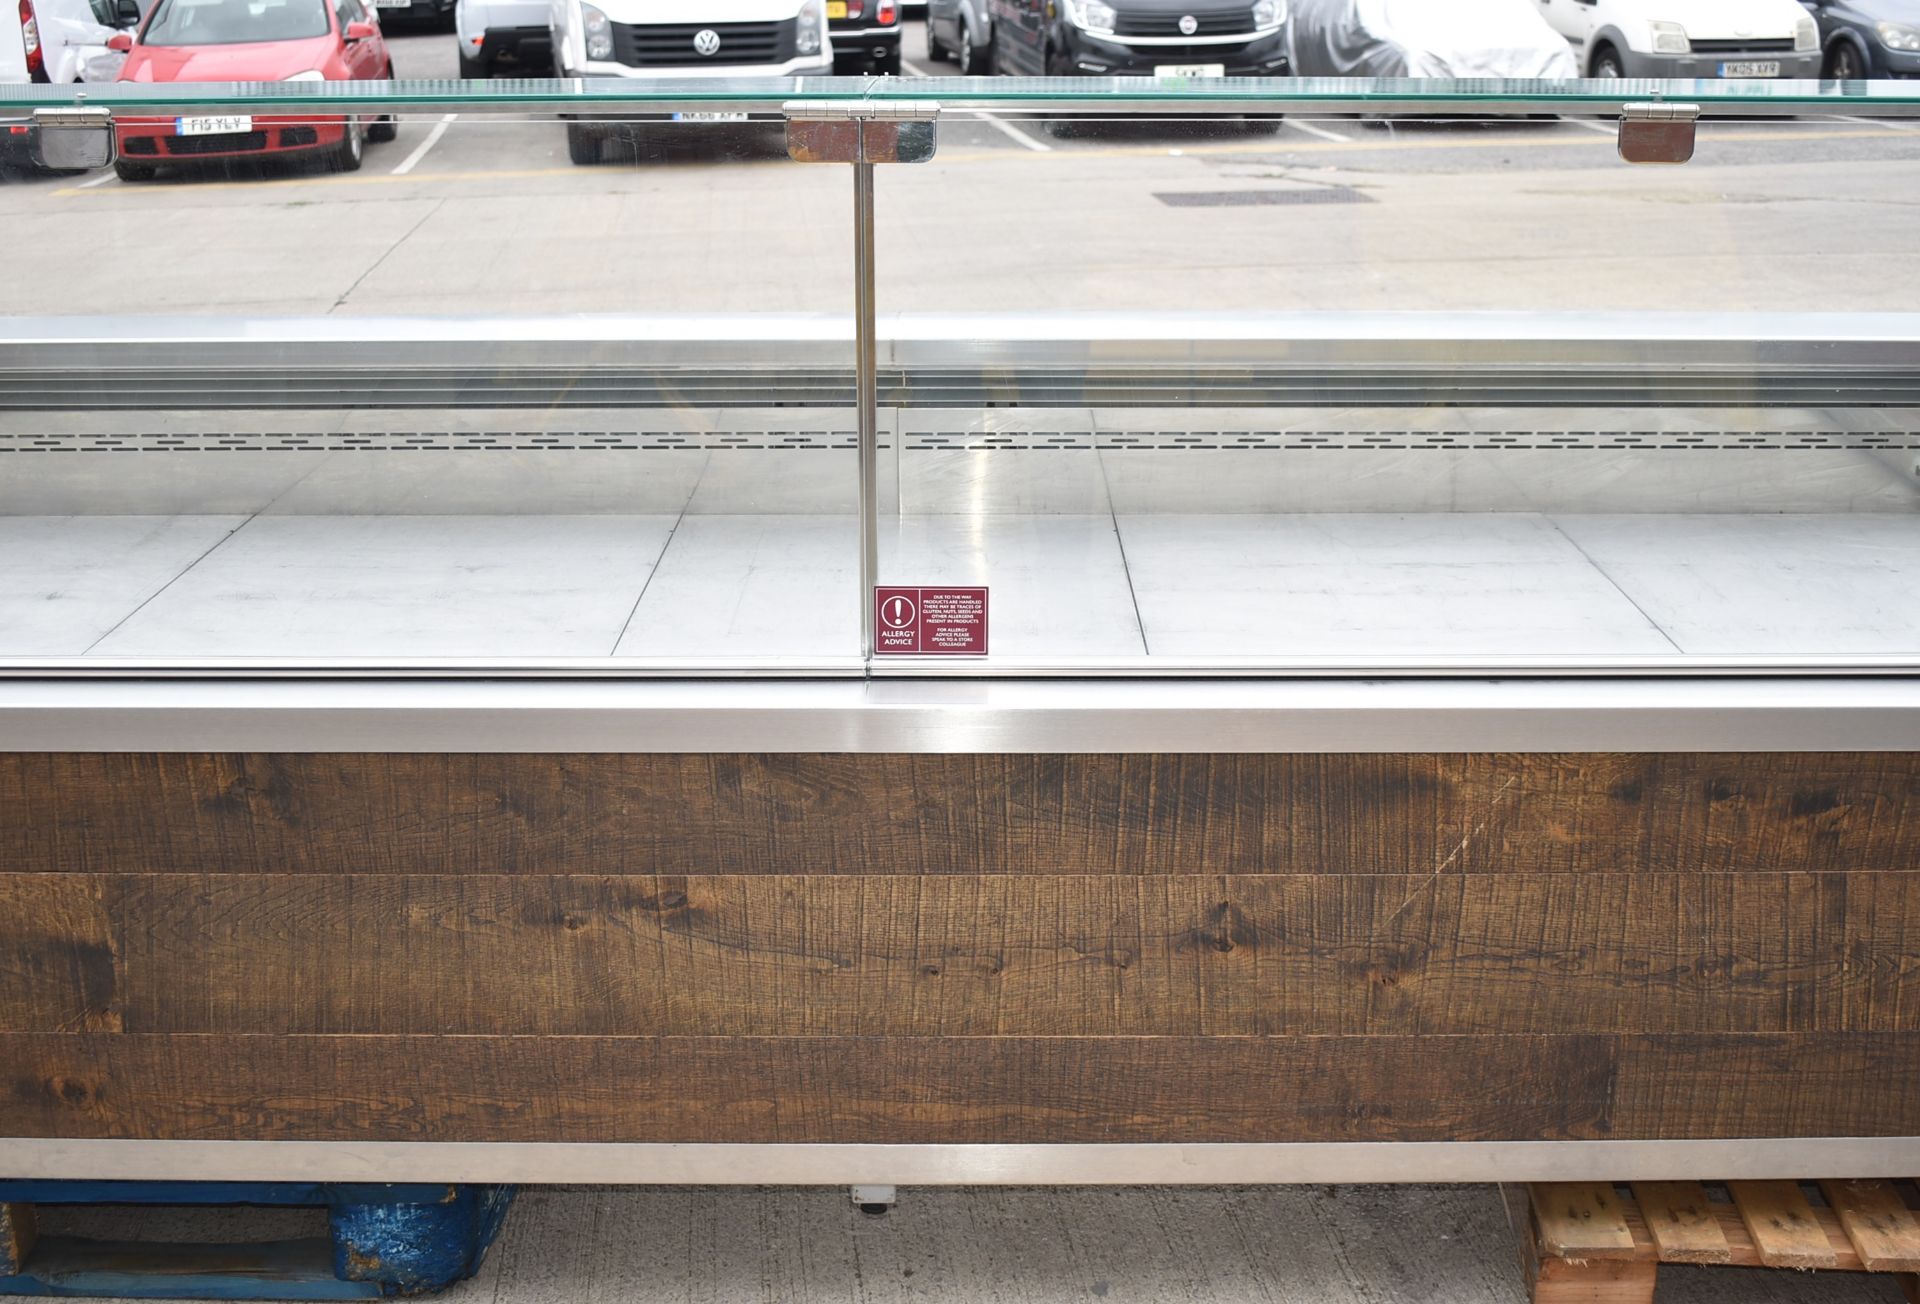 1 x Eurocryor Bistro Refrigerated Retail Counter - Suitable For Takeaways, Butchers, Deli, Cake - Image 9 of 28